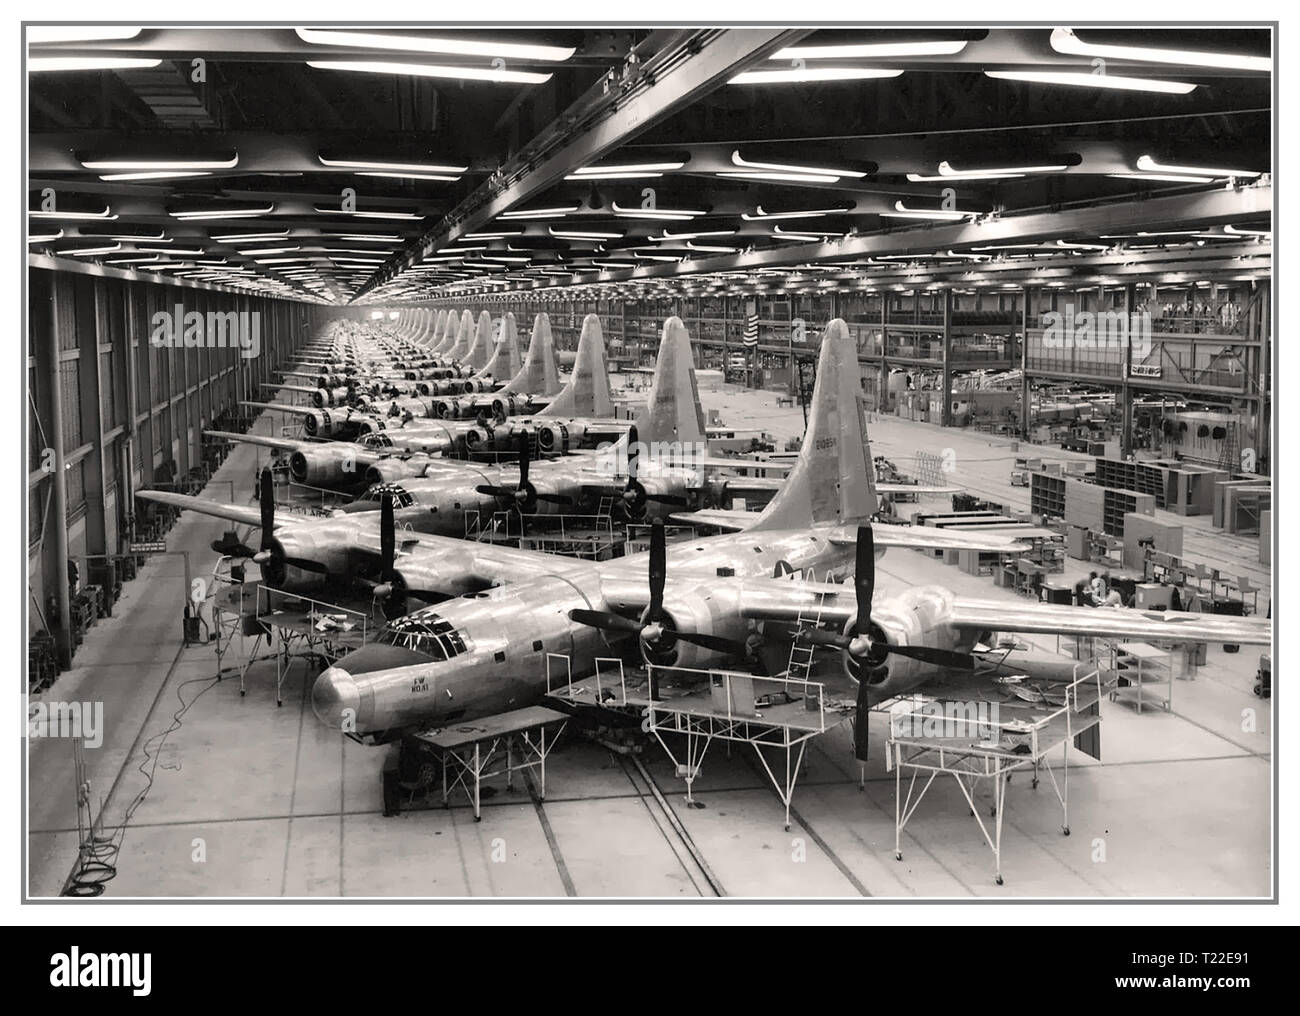 WW2 Aircraft Production Line of B-32 Bomber. Extensive impressive large scale manufacturing Aircraft Factory in Fort Worth Texas USA 1944 World War II Large scale aircraft production line USA Stock Photo